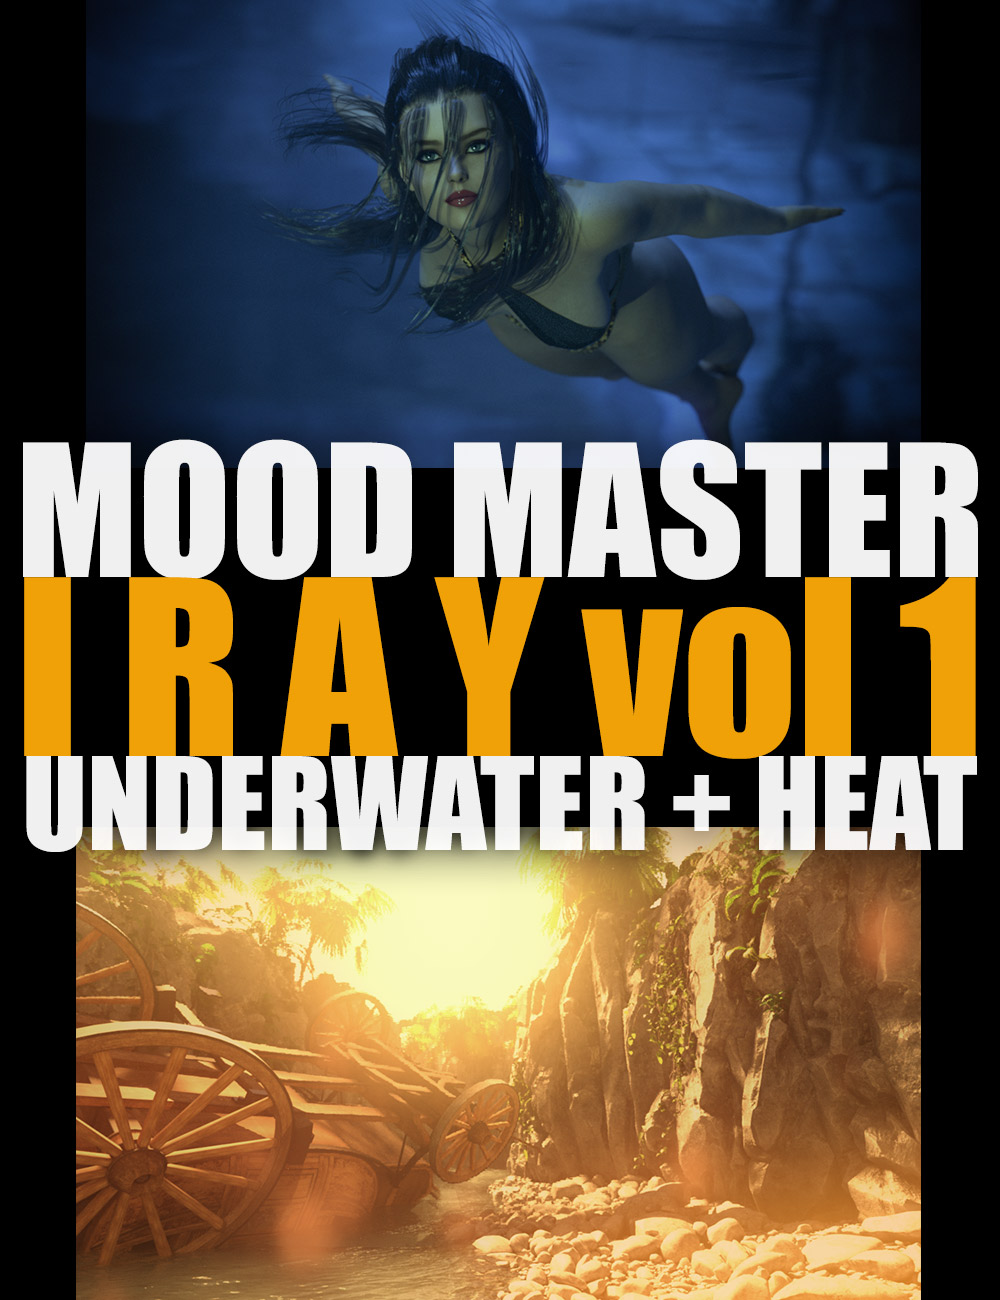 Mood Master Iray - Vol1 - Underwater and Heat by: Dreamlight, 3D Models by Daz 3D